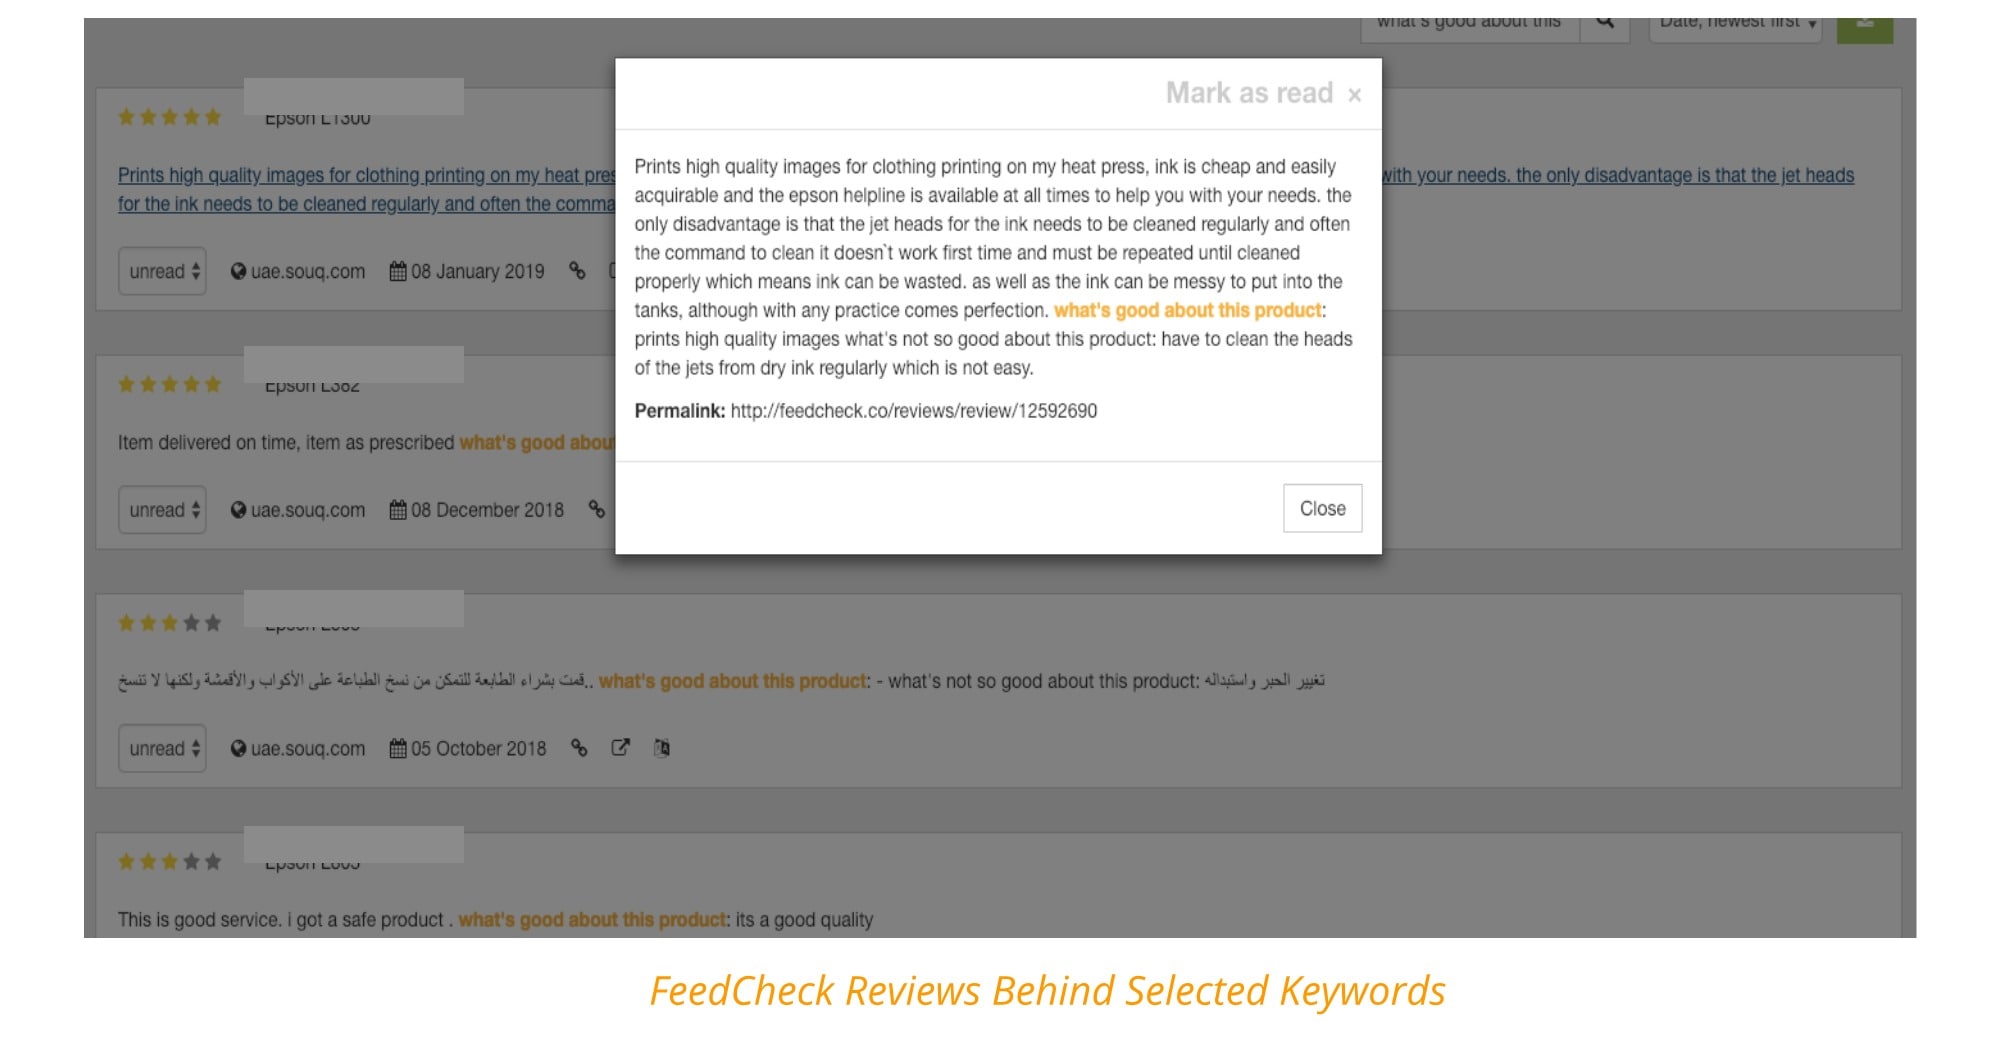 FeedCheck Product Review Monitoring